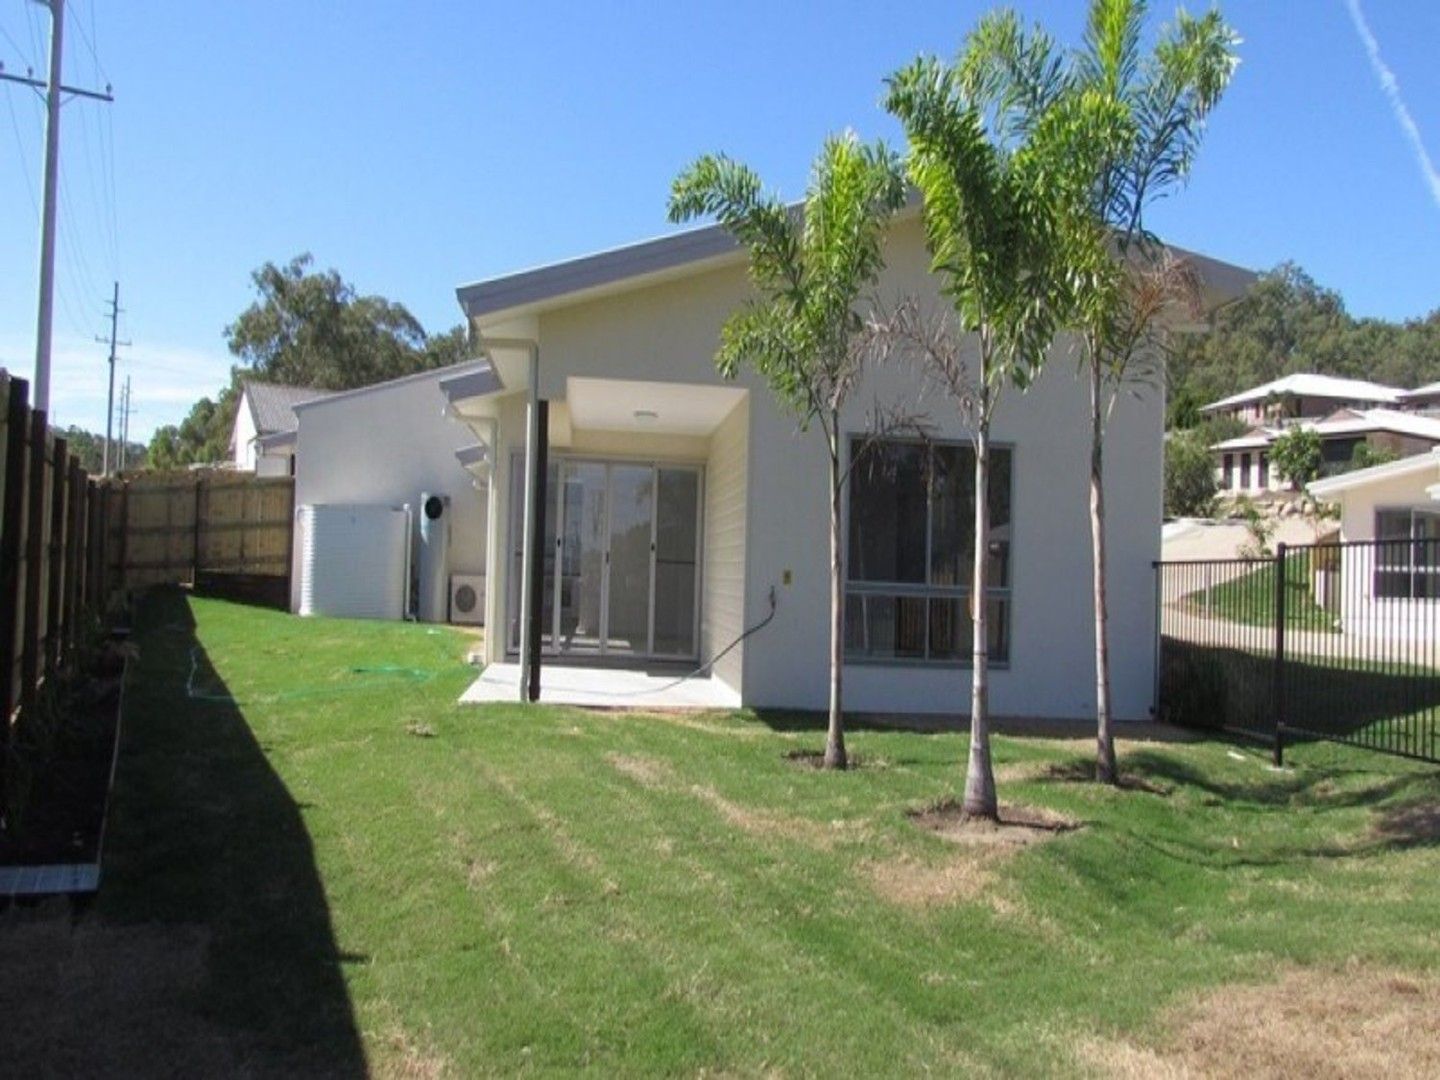 2 bedrooms Apartment / Unit / Flat in 10/5 Valley Vista Court GLADSTONE QLD 4680 GLADSTONE CENTRAL QLD, 4680